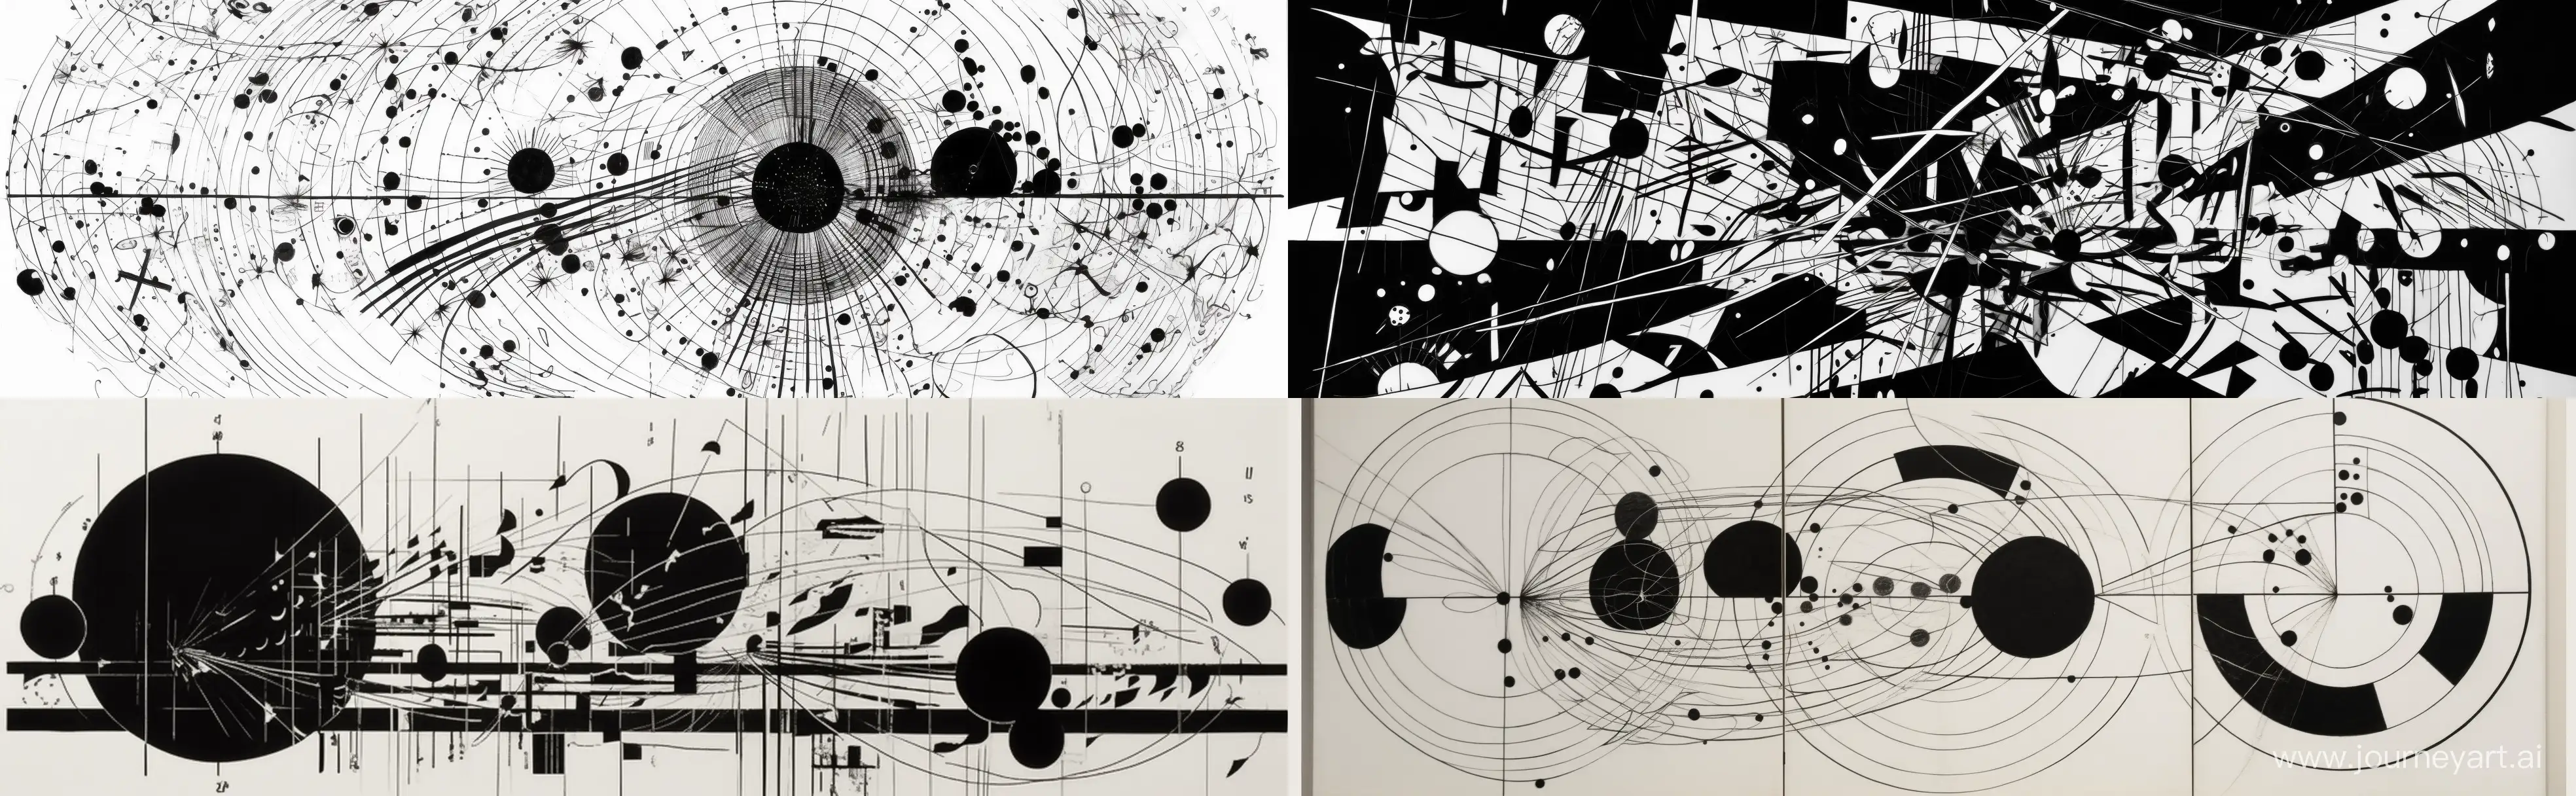 Minimalistic-Black-and-White-Graphic-Score-Drawing-Inspired-by-Cornelius-Cardews-Style